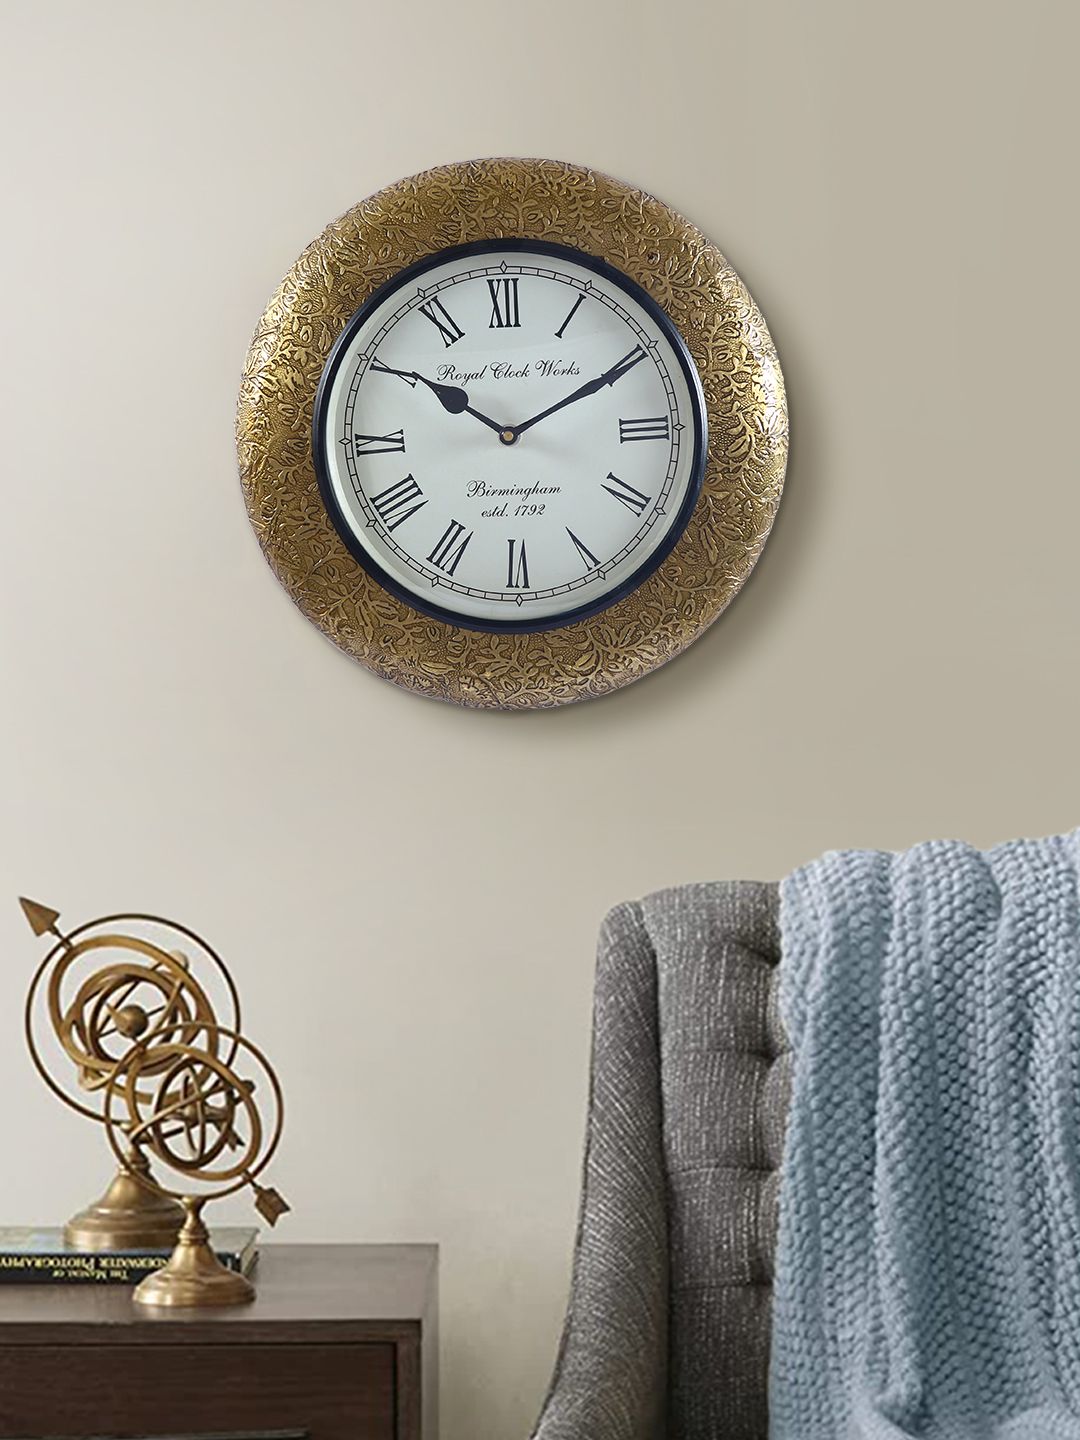 Aapno Rajasthan Gold-Toned & White Textured Contemporary Wall Clock Price in India